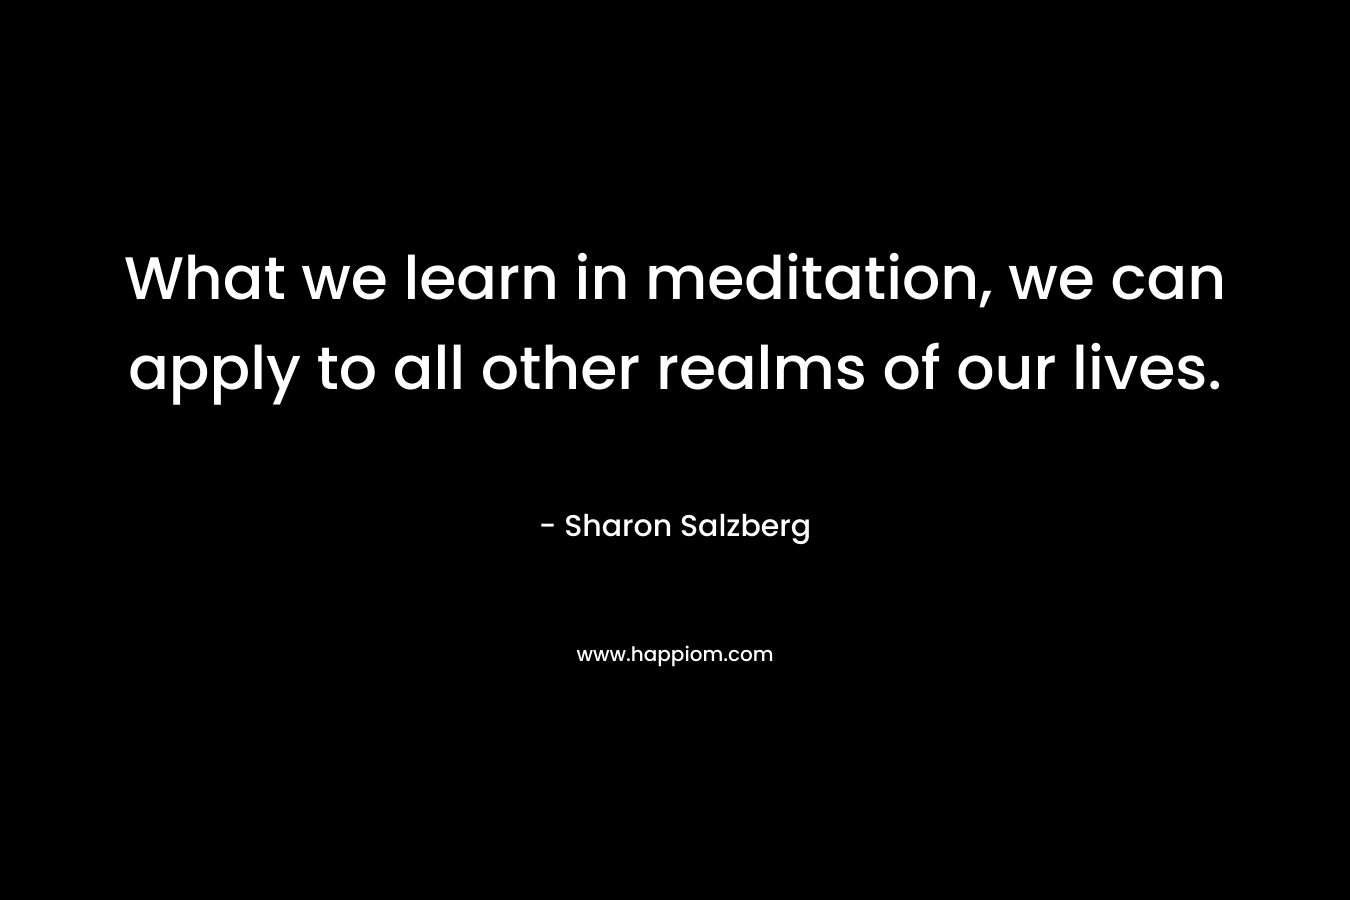 What we learn in meditation, we can apply to all other realms of our lives.